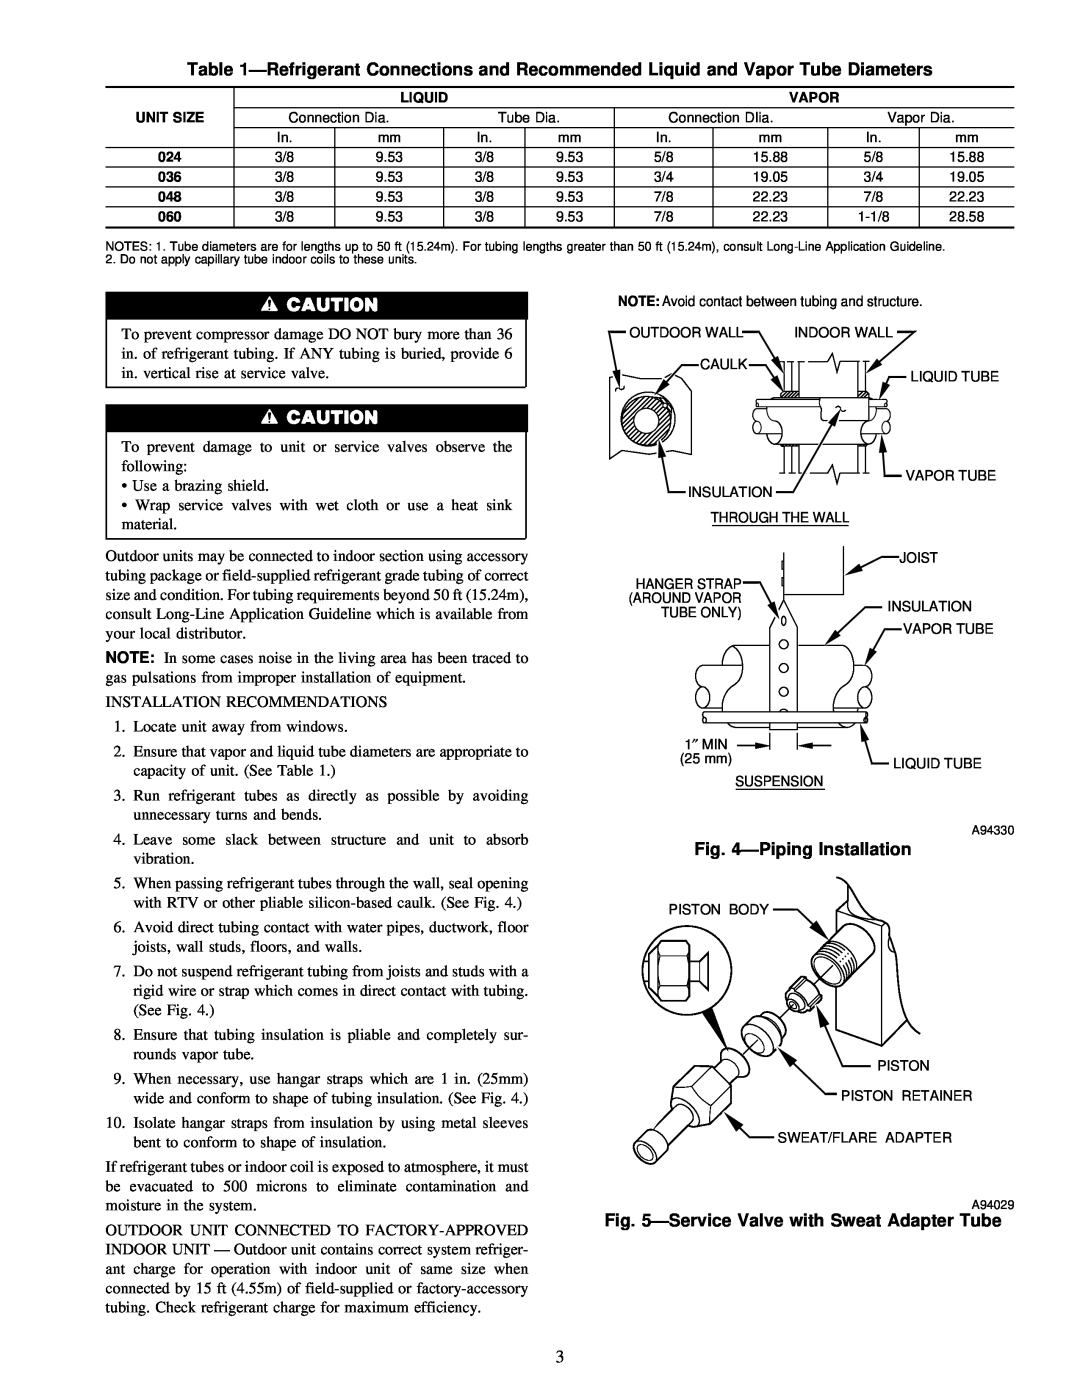 Carrier 38YCX instruction manual PipingInstallation, ServiceValve with Sweat Adapter Tube 